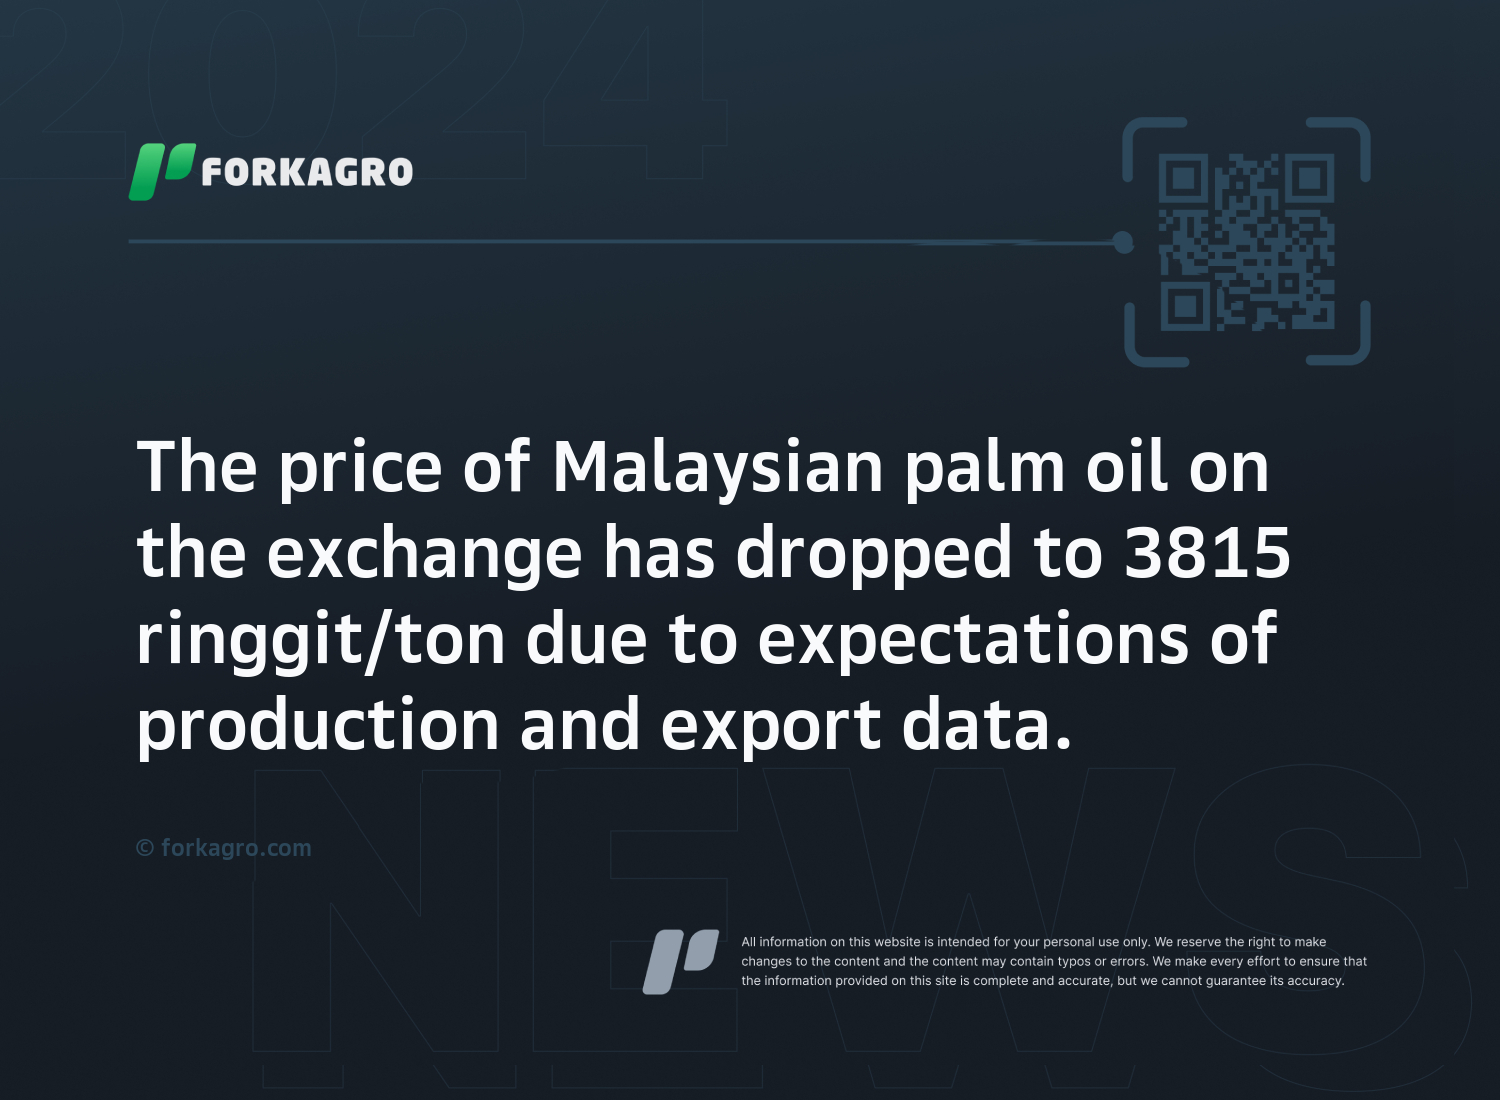 The price of Malaysian palm oil on the exchange has dropped to 3815 ringgit/ton due to expectations of production and export data.